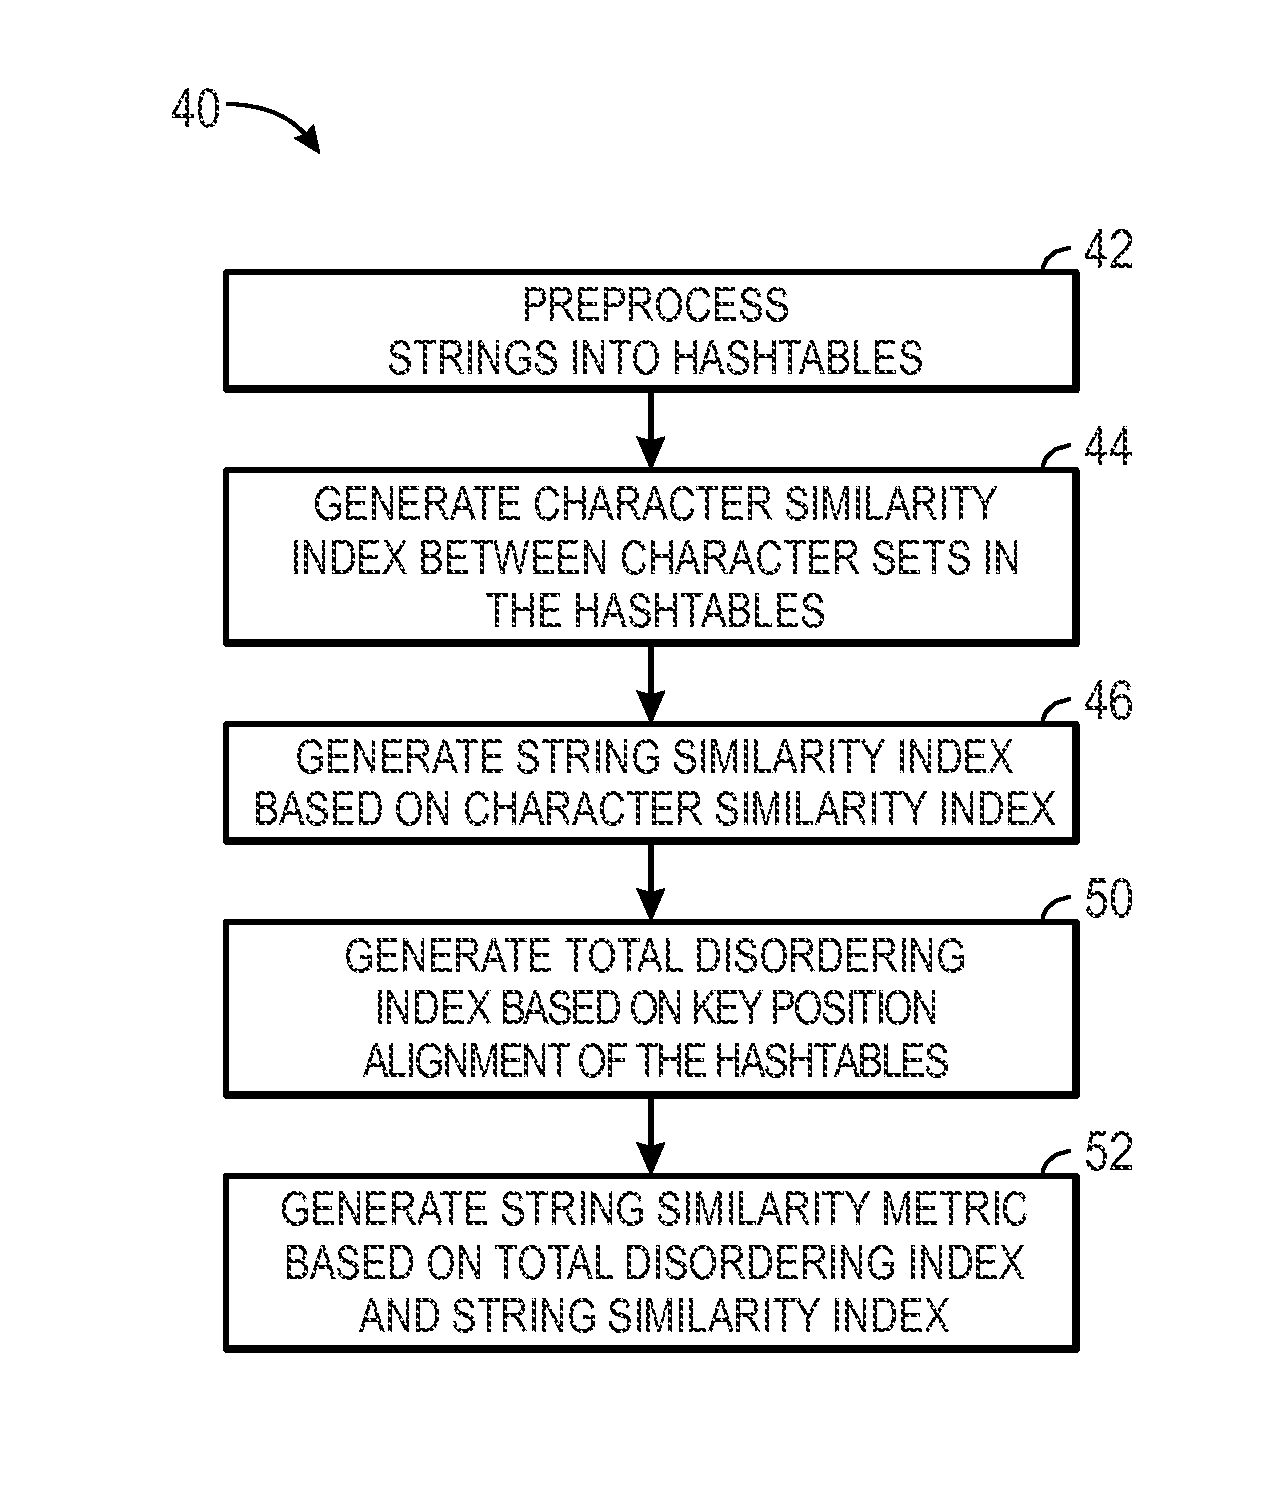 System and method for determining string similarity